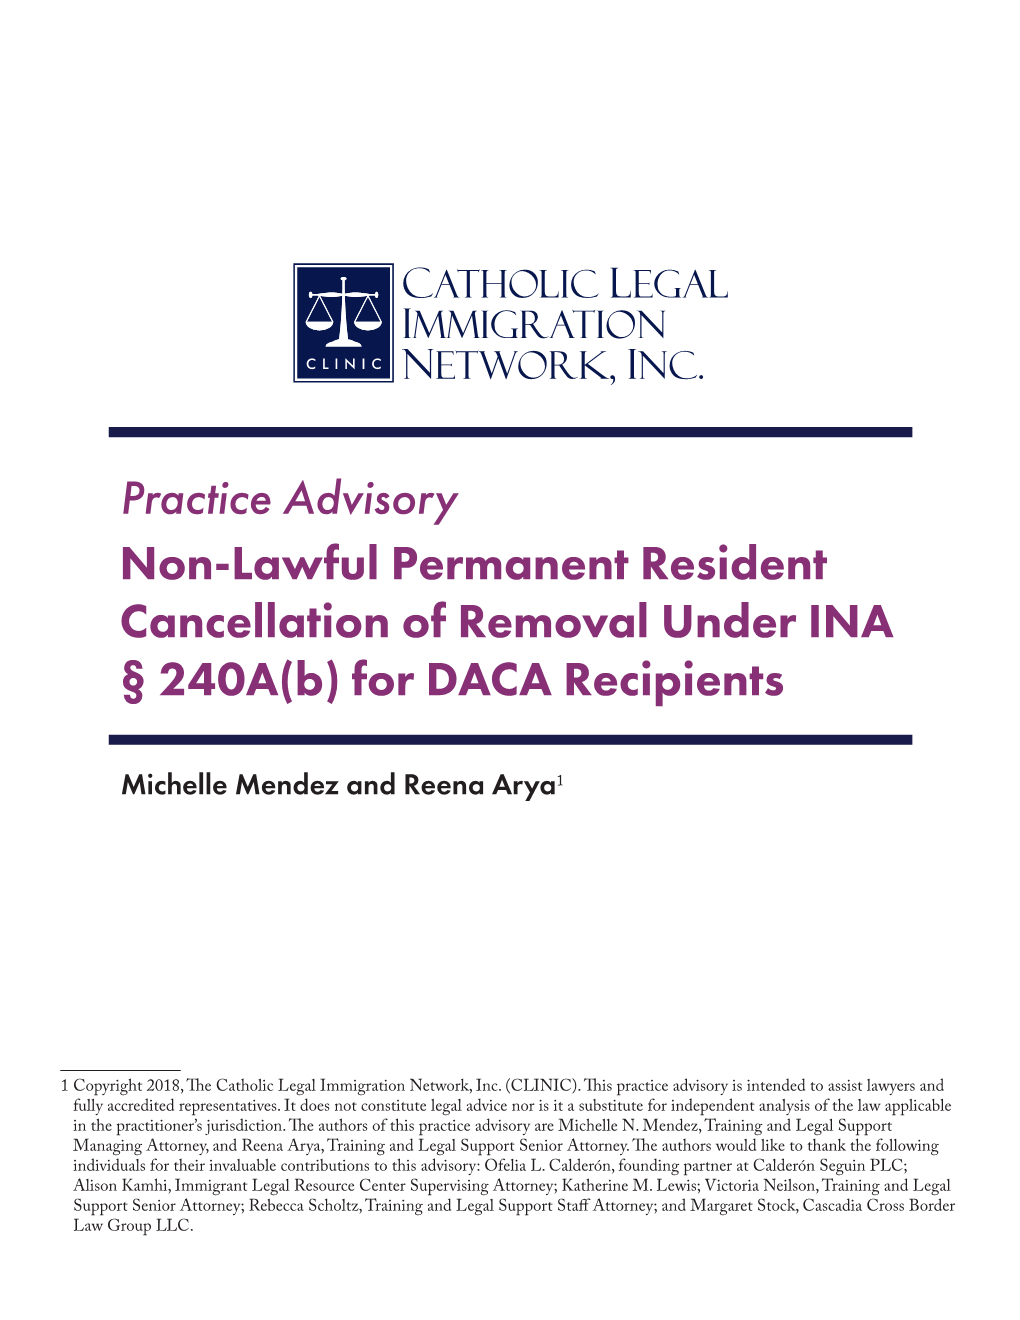 Practice Advisory Non-Lawful Permanent Resident Cancellation of Removal Under INA § 240A(B) for DACA Recipients